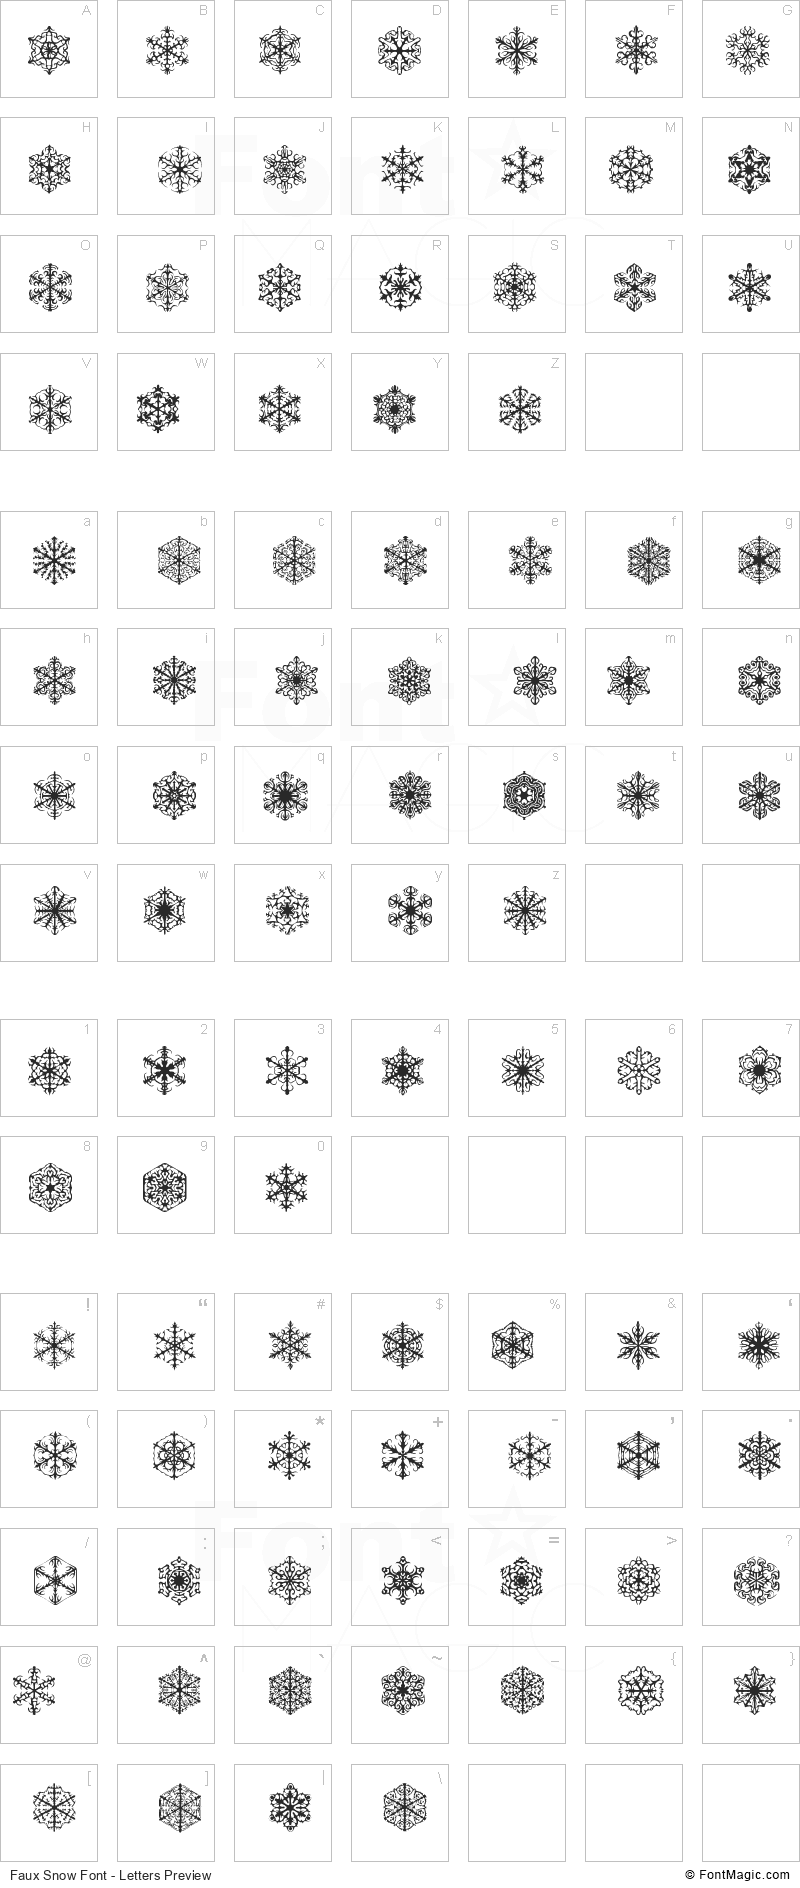 Faux Snow Font - All Latters Preview Chart